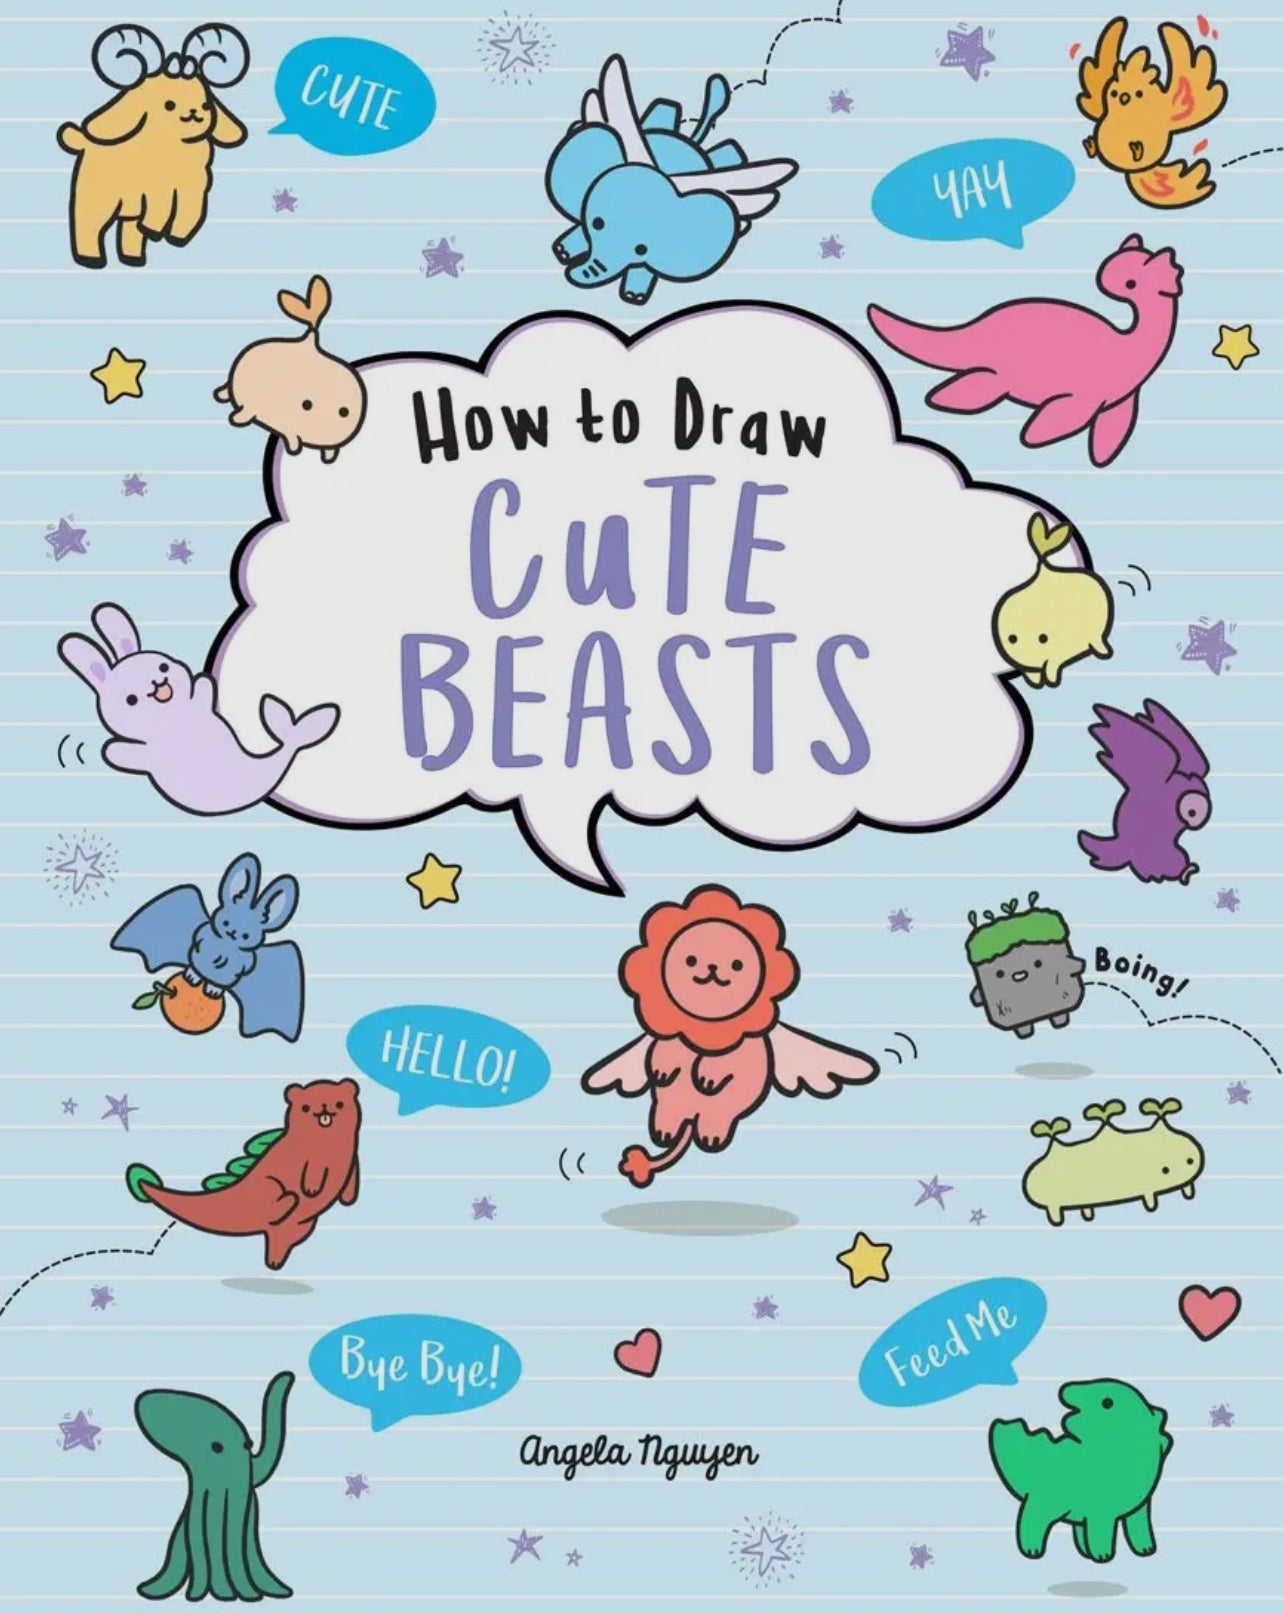 How to Draw Cute Beasts